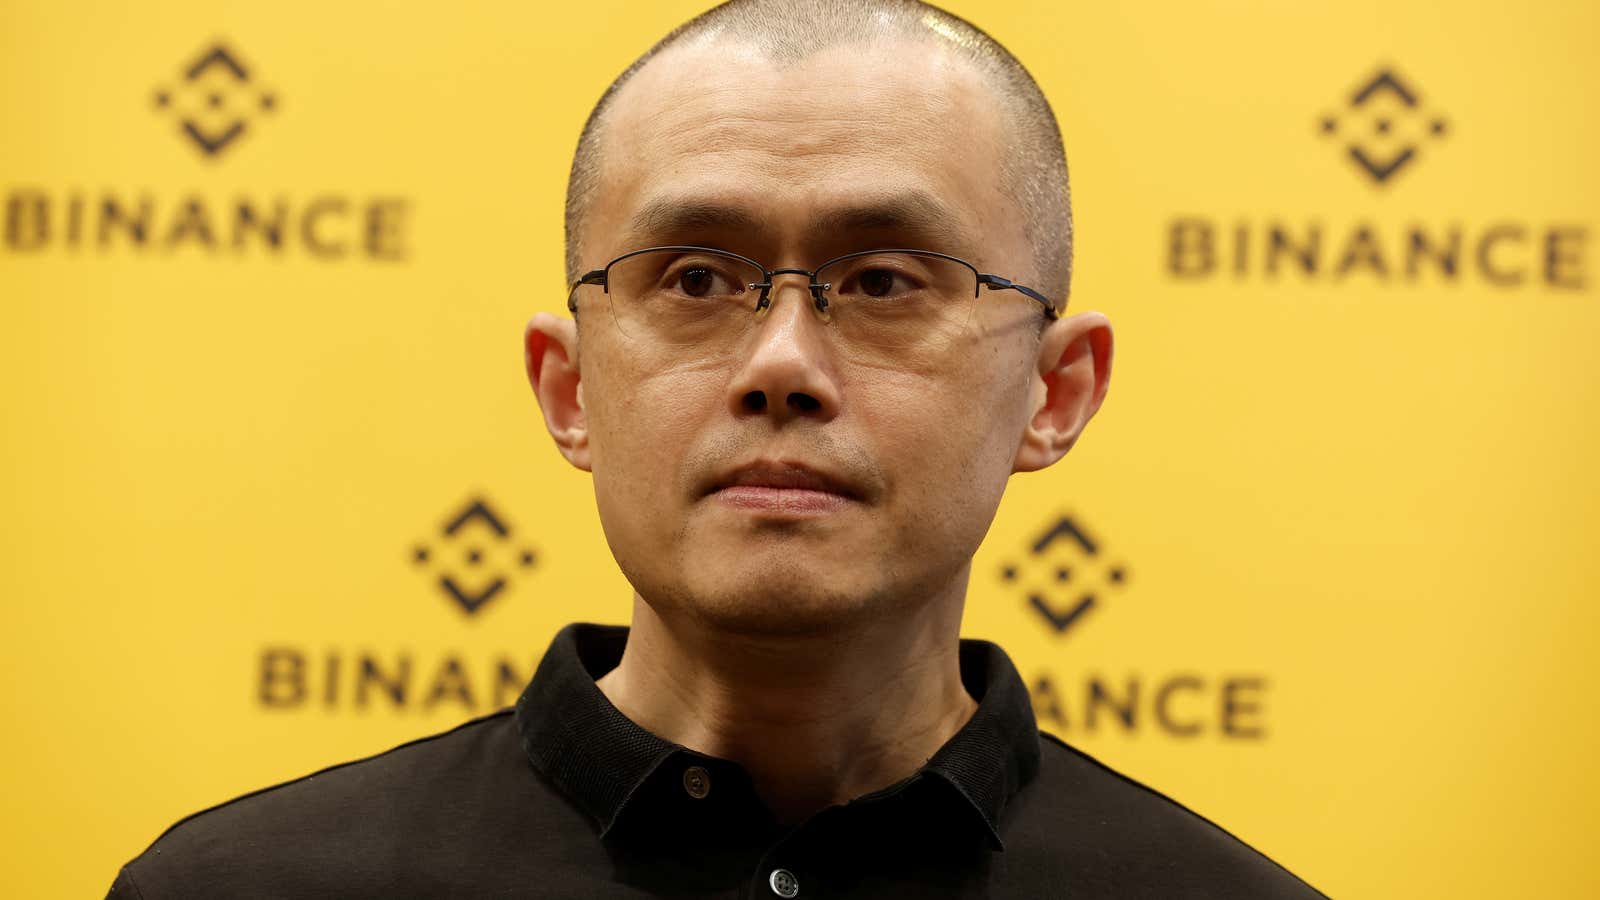 Zhao Changpeng, founder and chief executive officer of Binance, attends the Viva Technology conference dedicated to innovation and startups at Porte de Versailles exhibition center in Paris, France June 16, 2022.